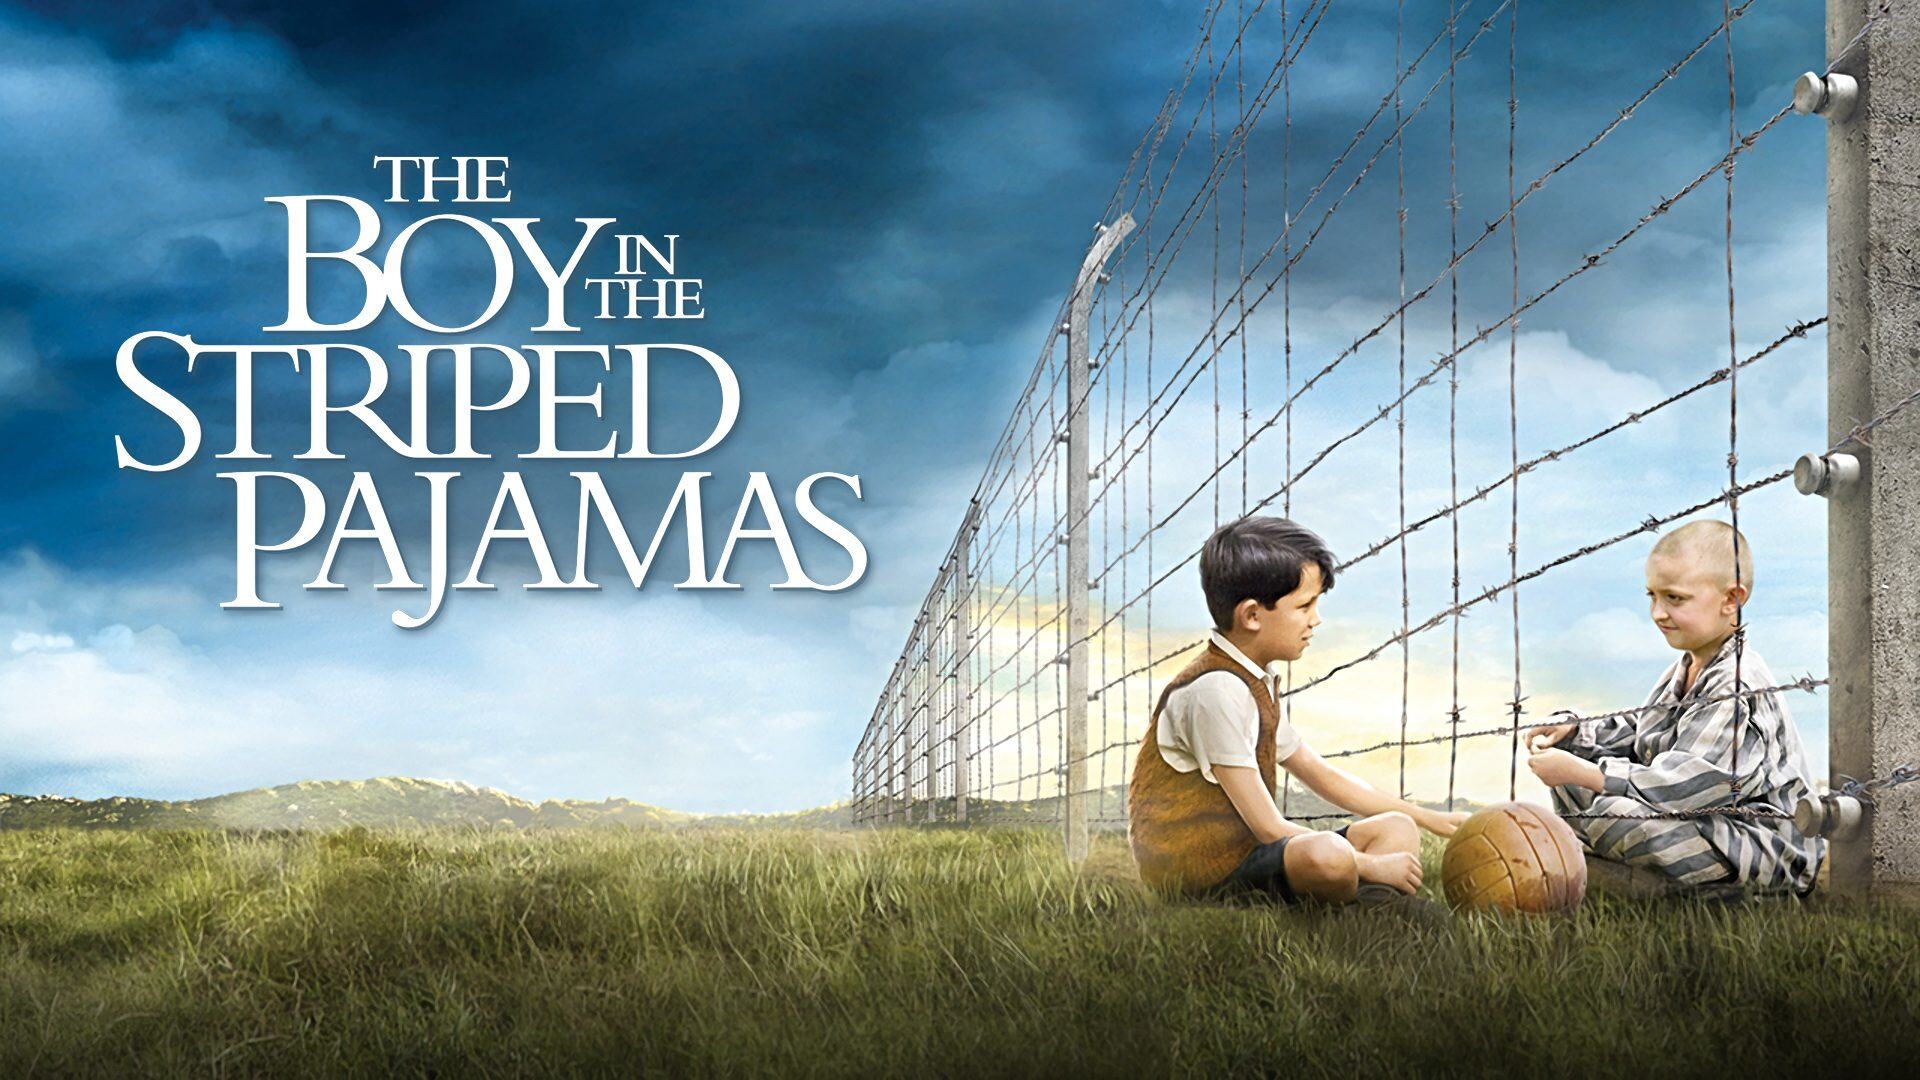 42 Facts about the movie The Boy in the Striped Pajamas - Facts.net